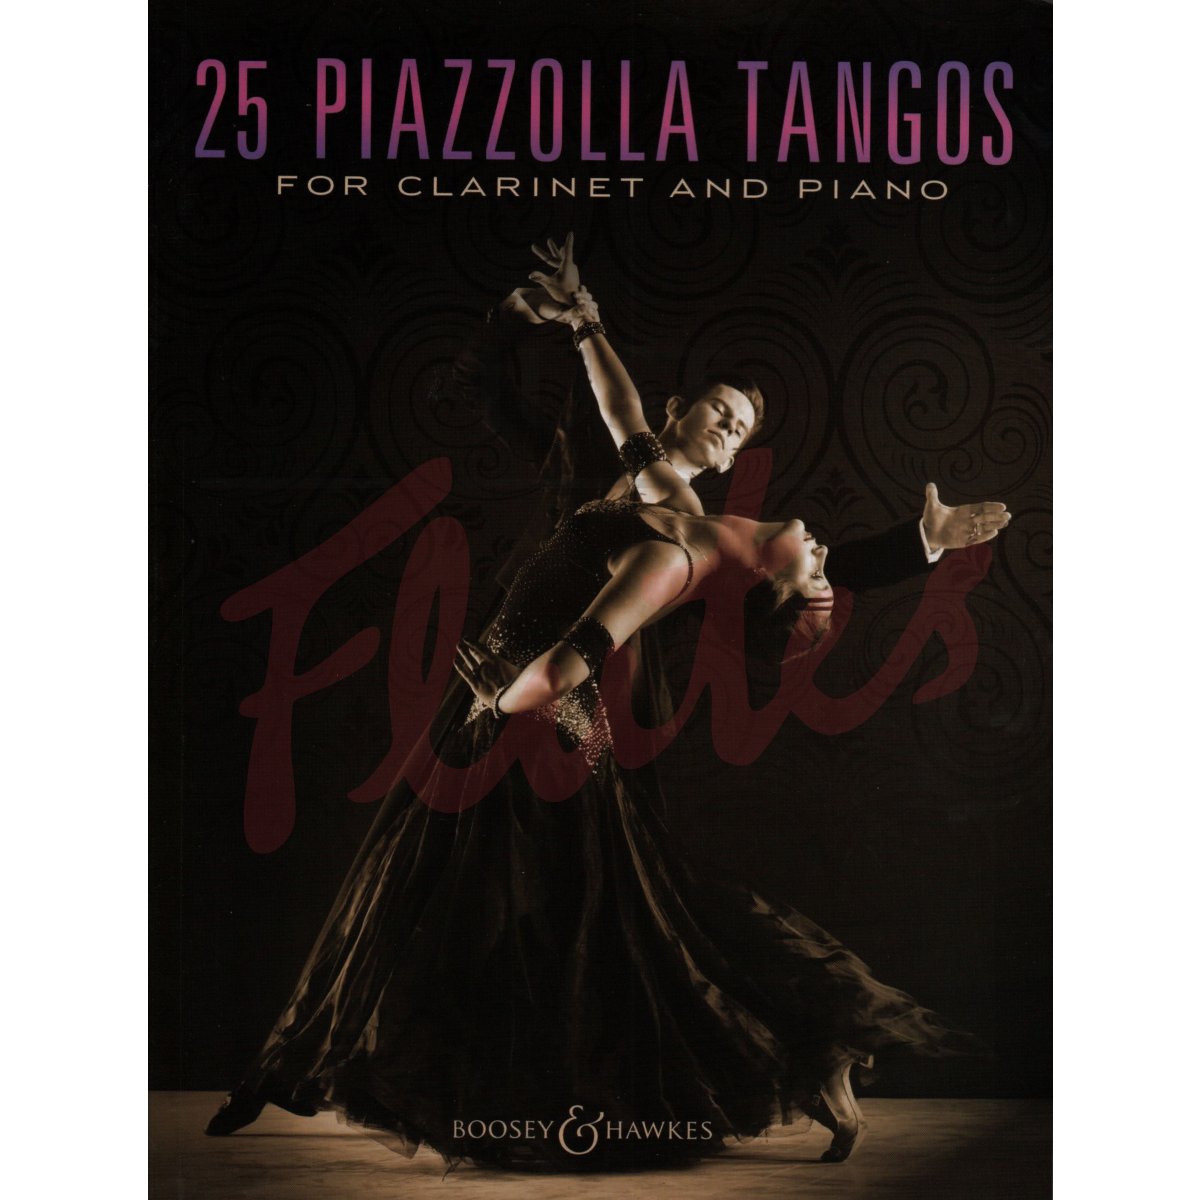 25 Piazzolla Tangos for Clarinet and Piano